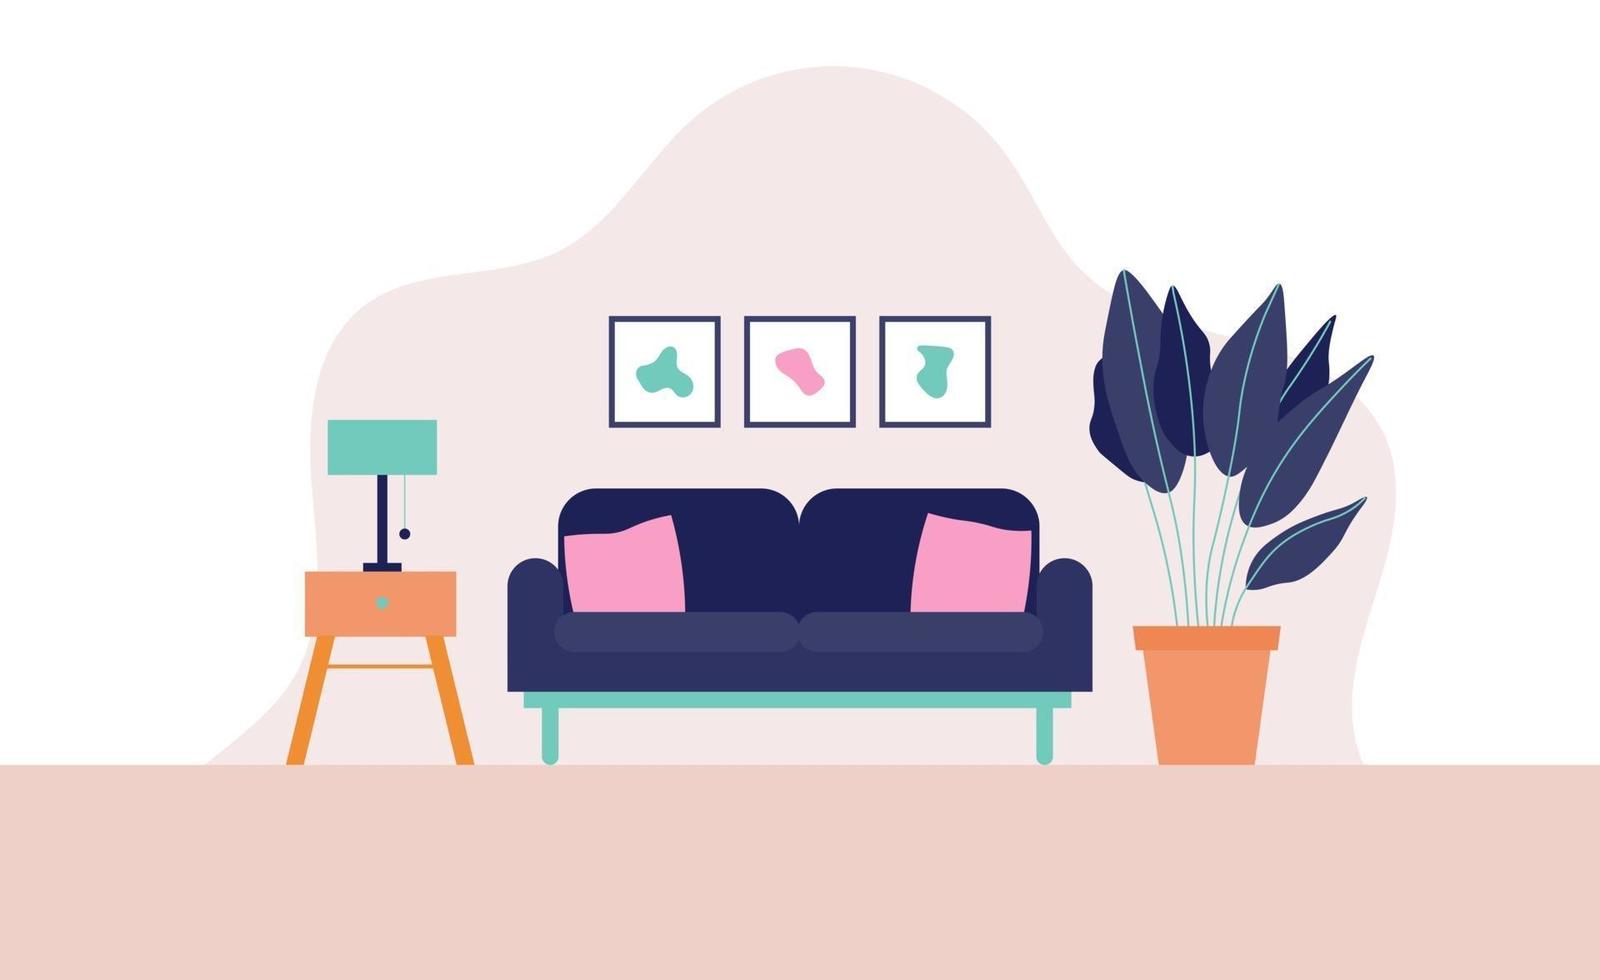 Home Interior with Couch, Side Table and Plant Illustration vector